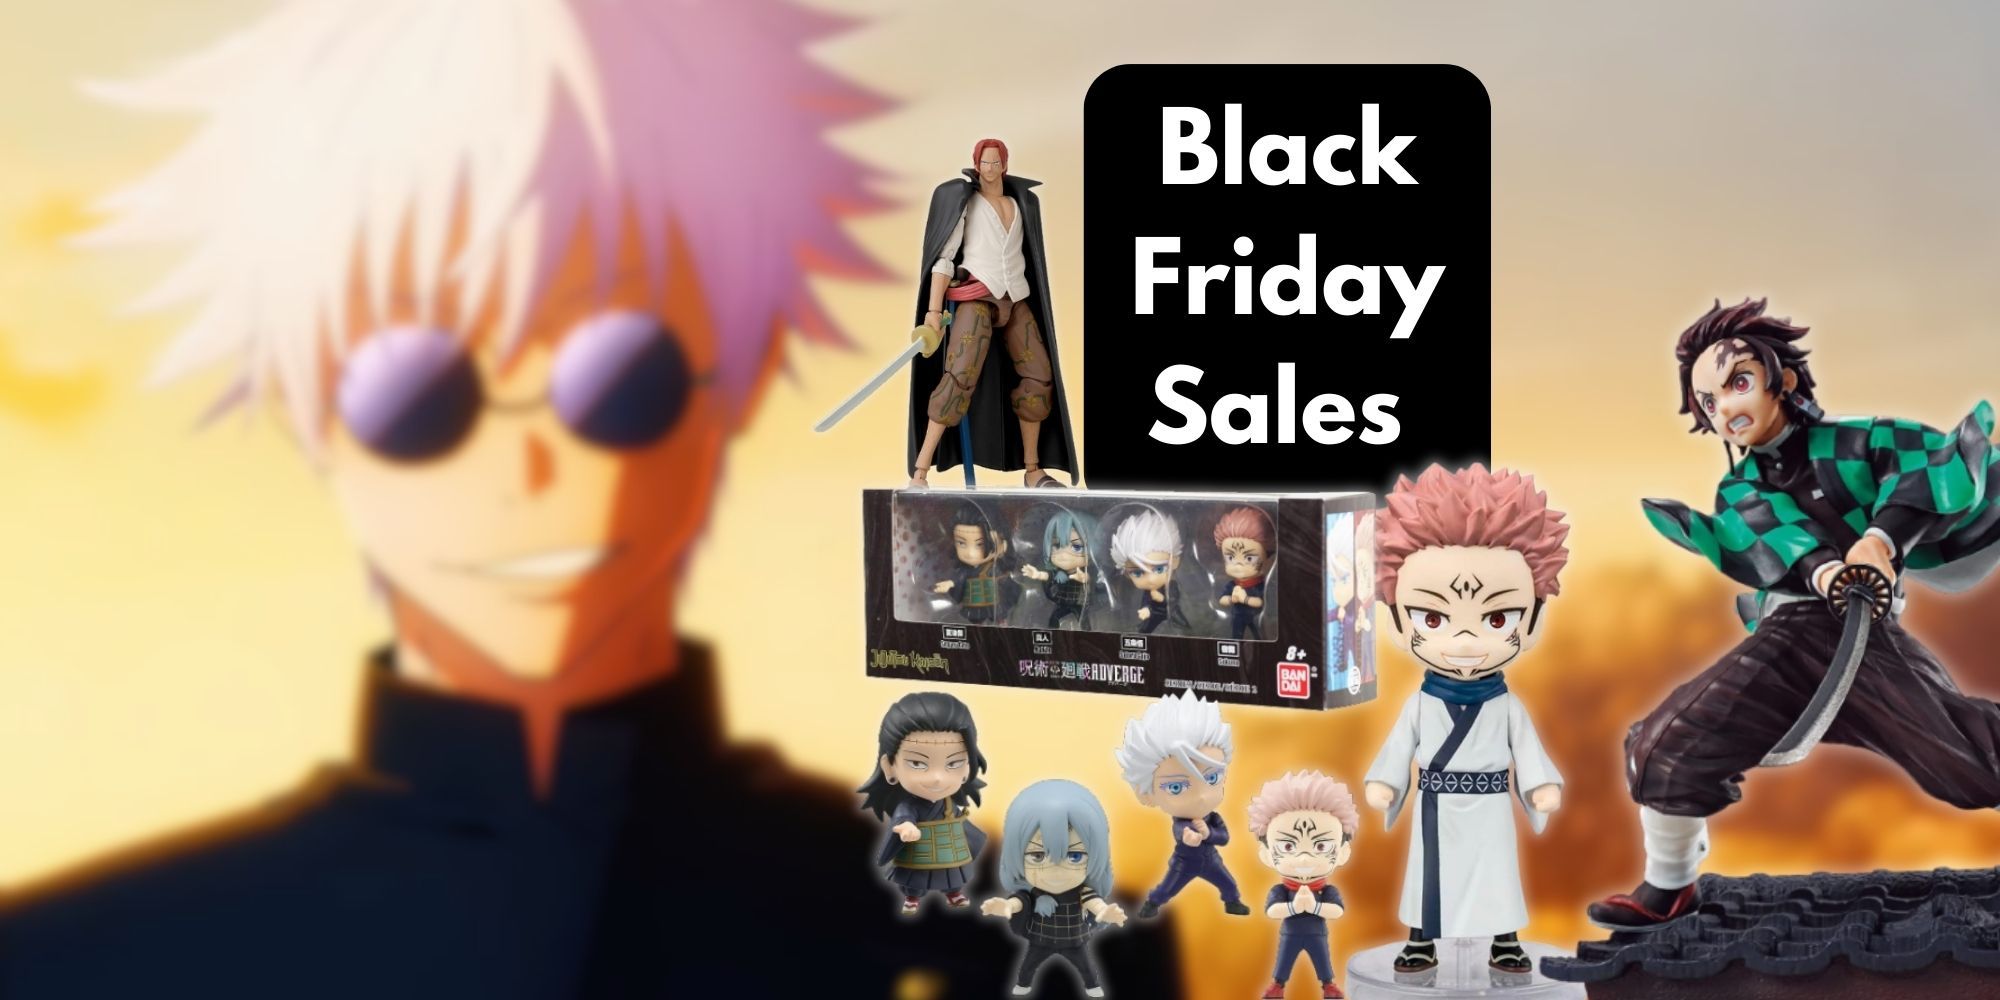 Anime figure products on a blurred background of Gojo from Jujutsu Kaisen with Black Friday Sales text